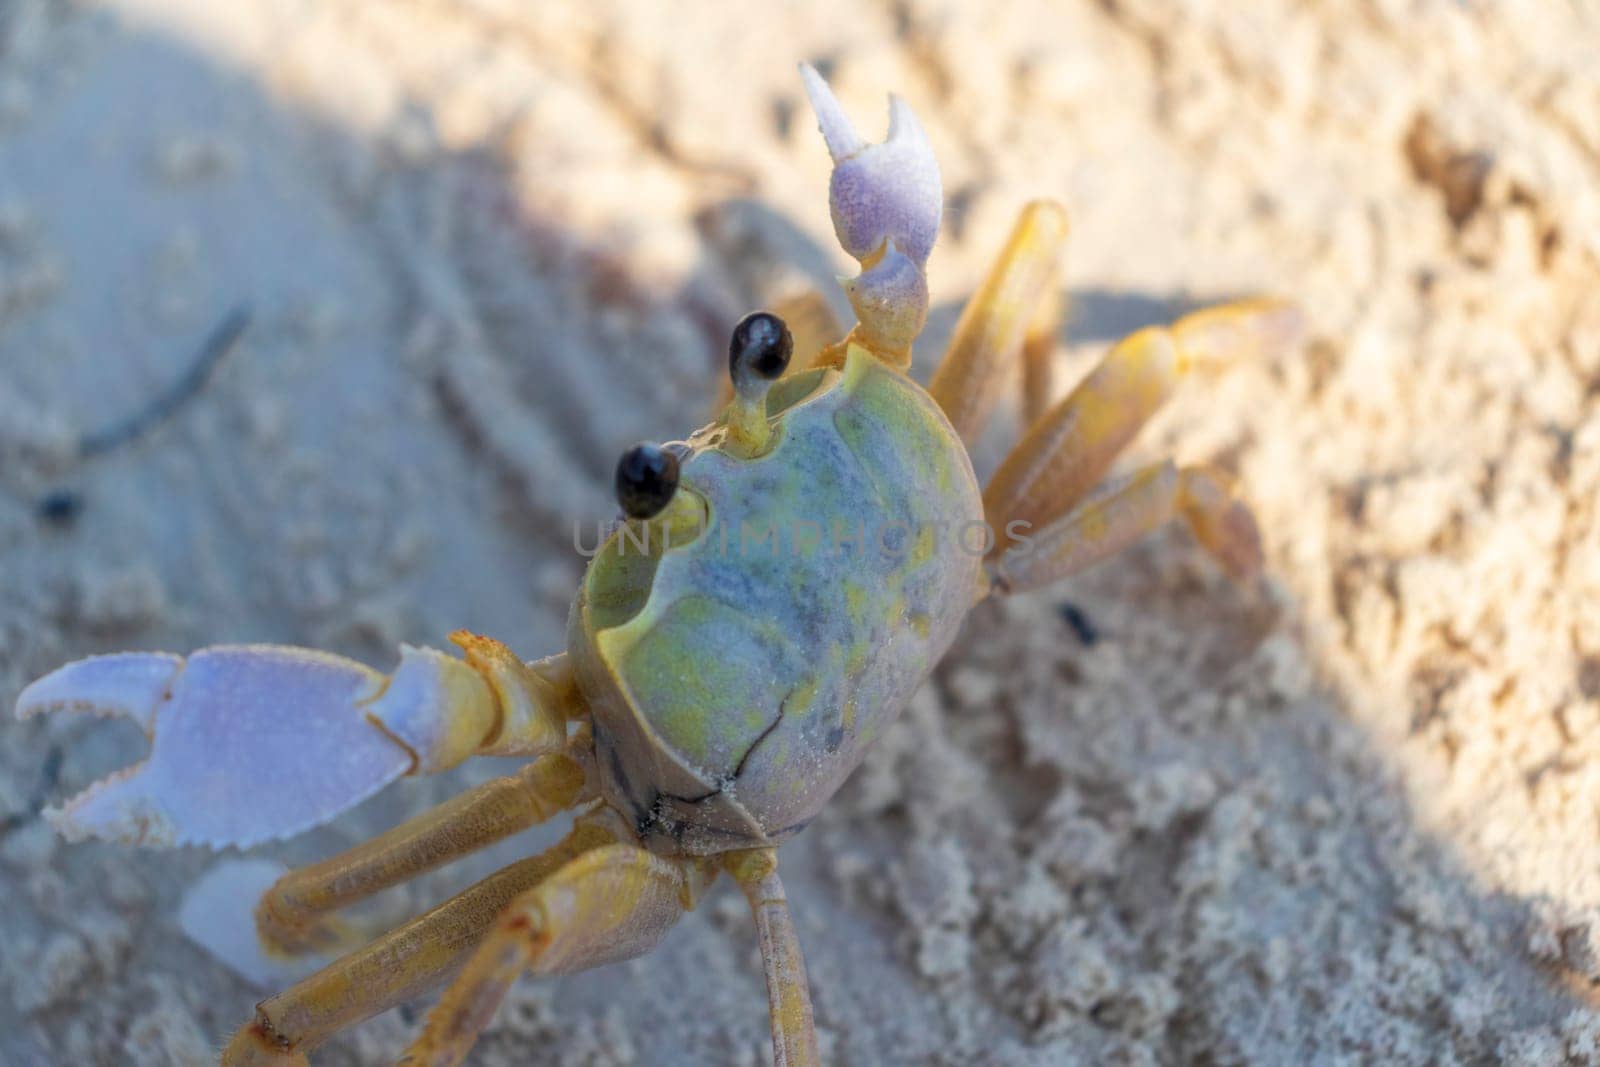 Close up shot of the small crab on the sand